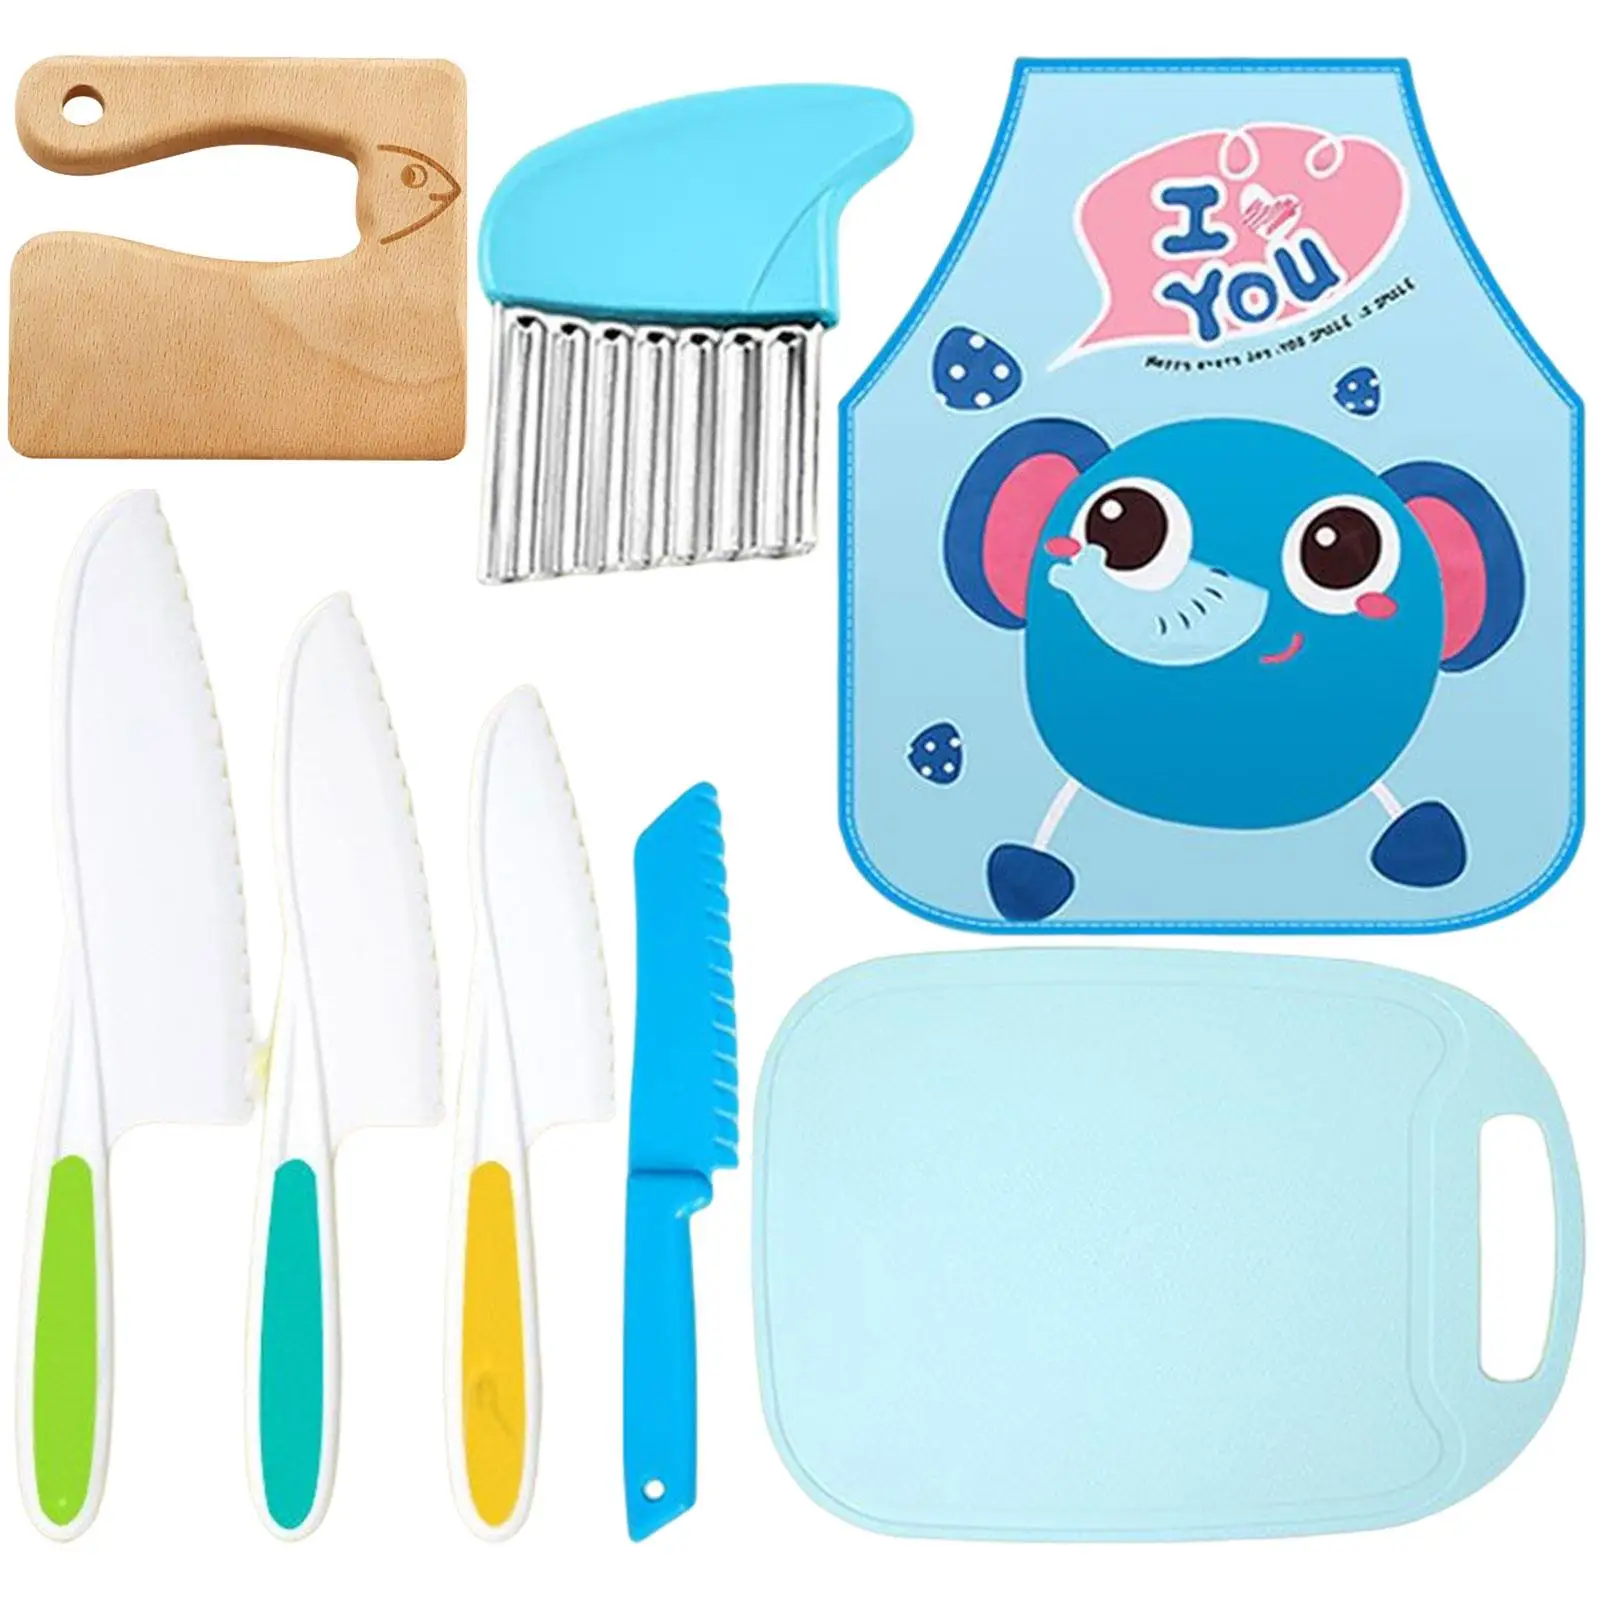 Kitchen Accessories Playset Cutting Board Apron for Children Gifts